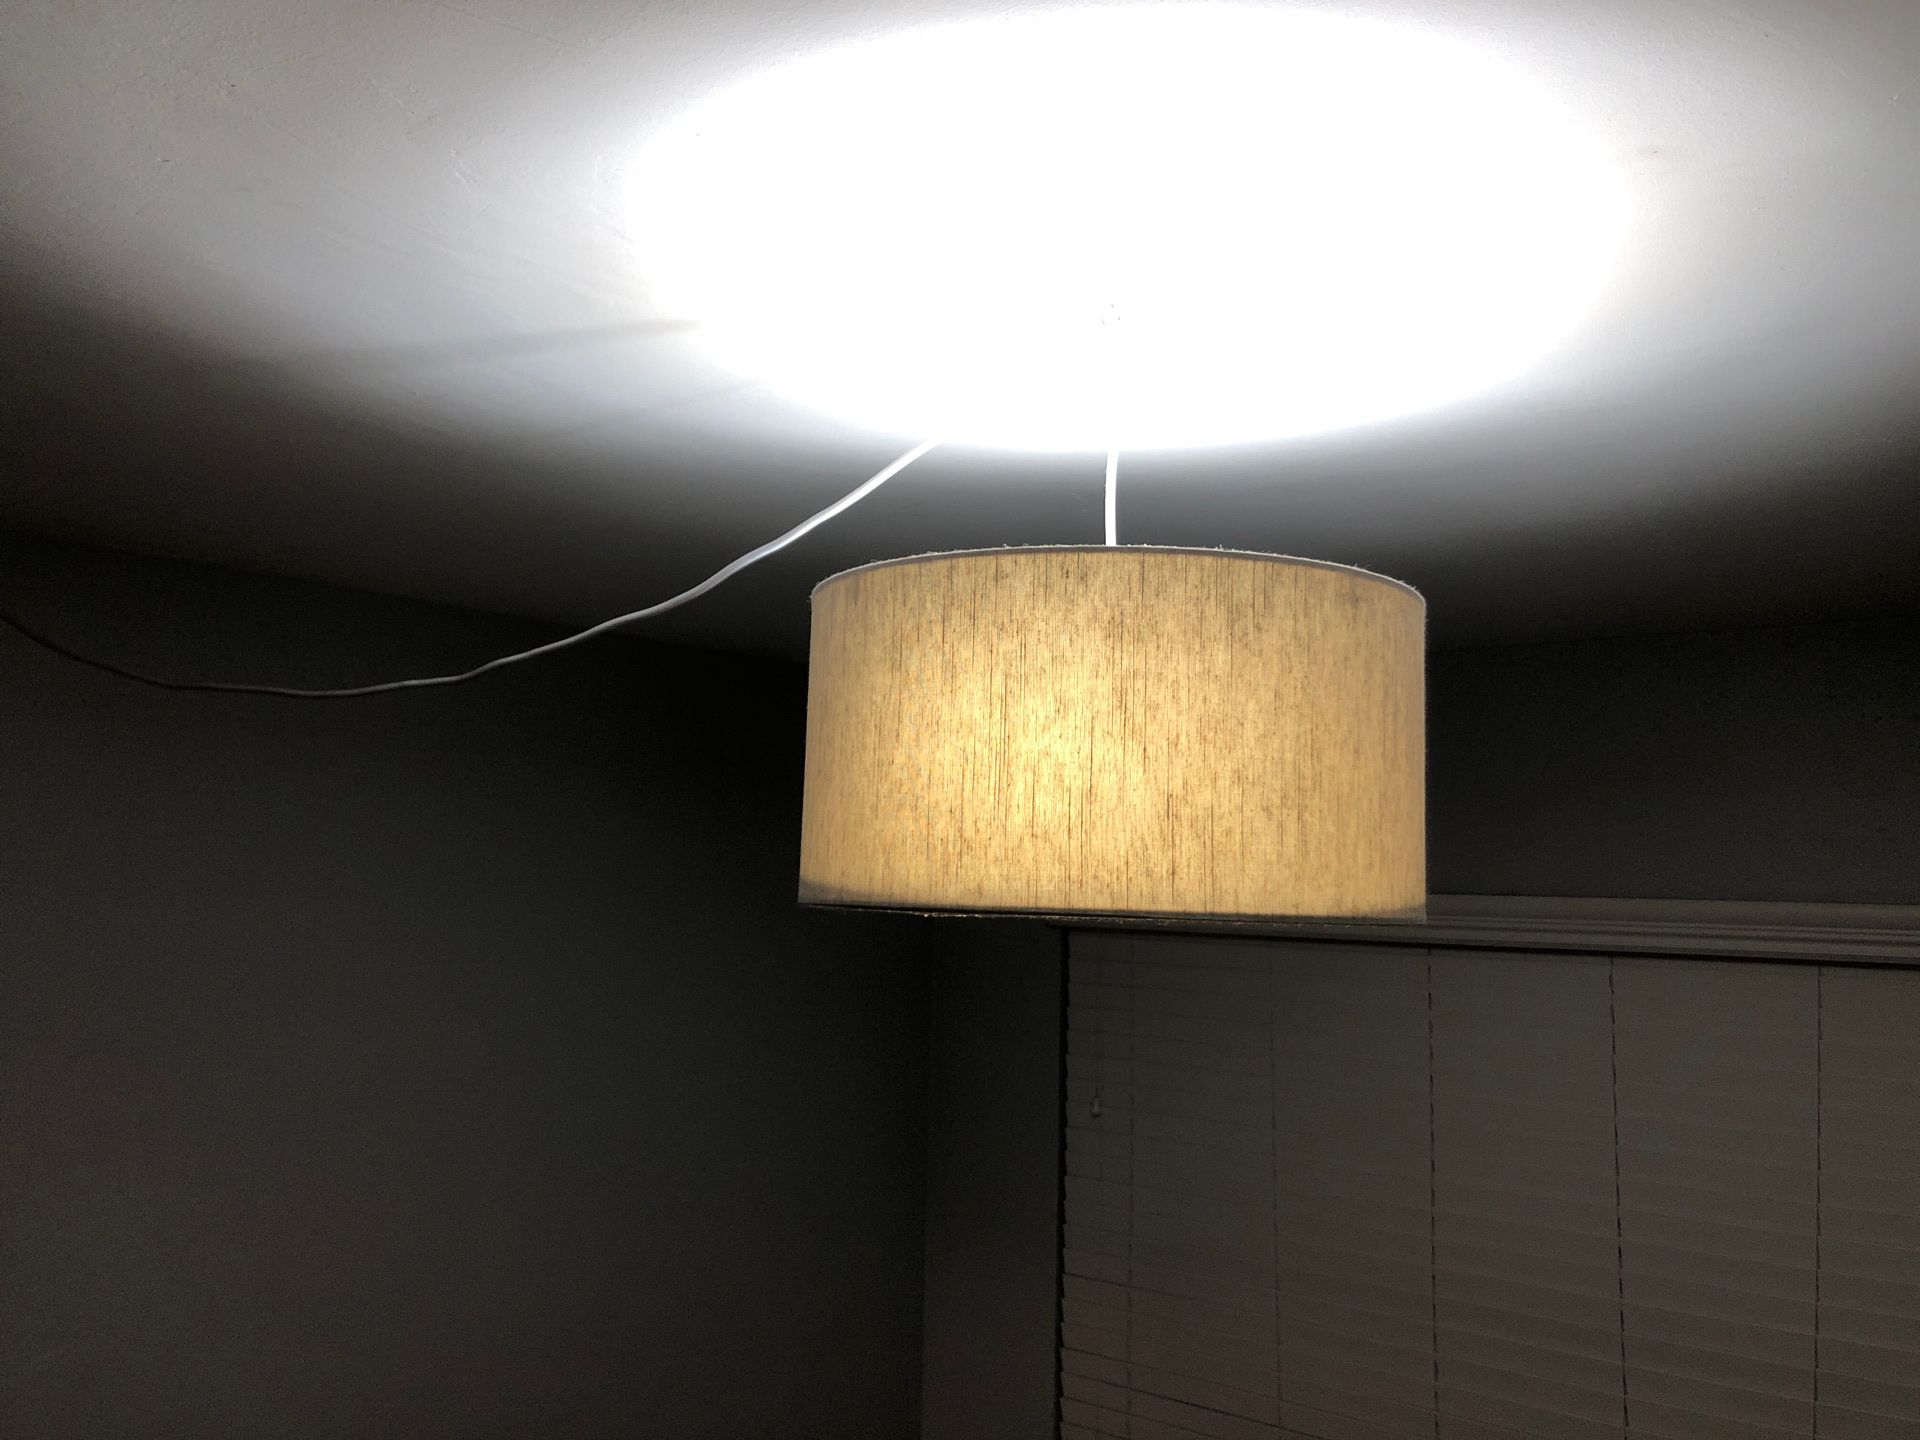 Hanging Pendant Drum Light - MUST SELL TODAY